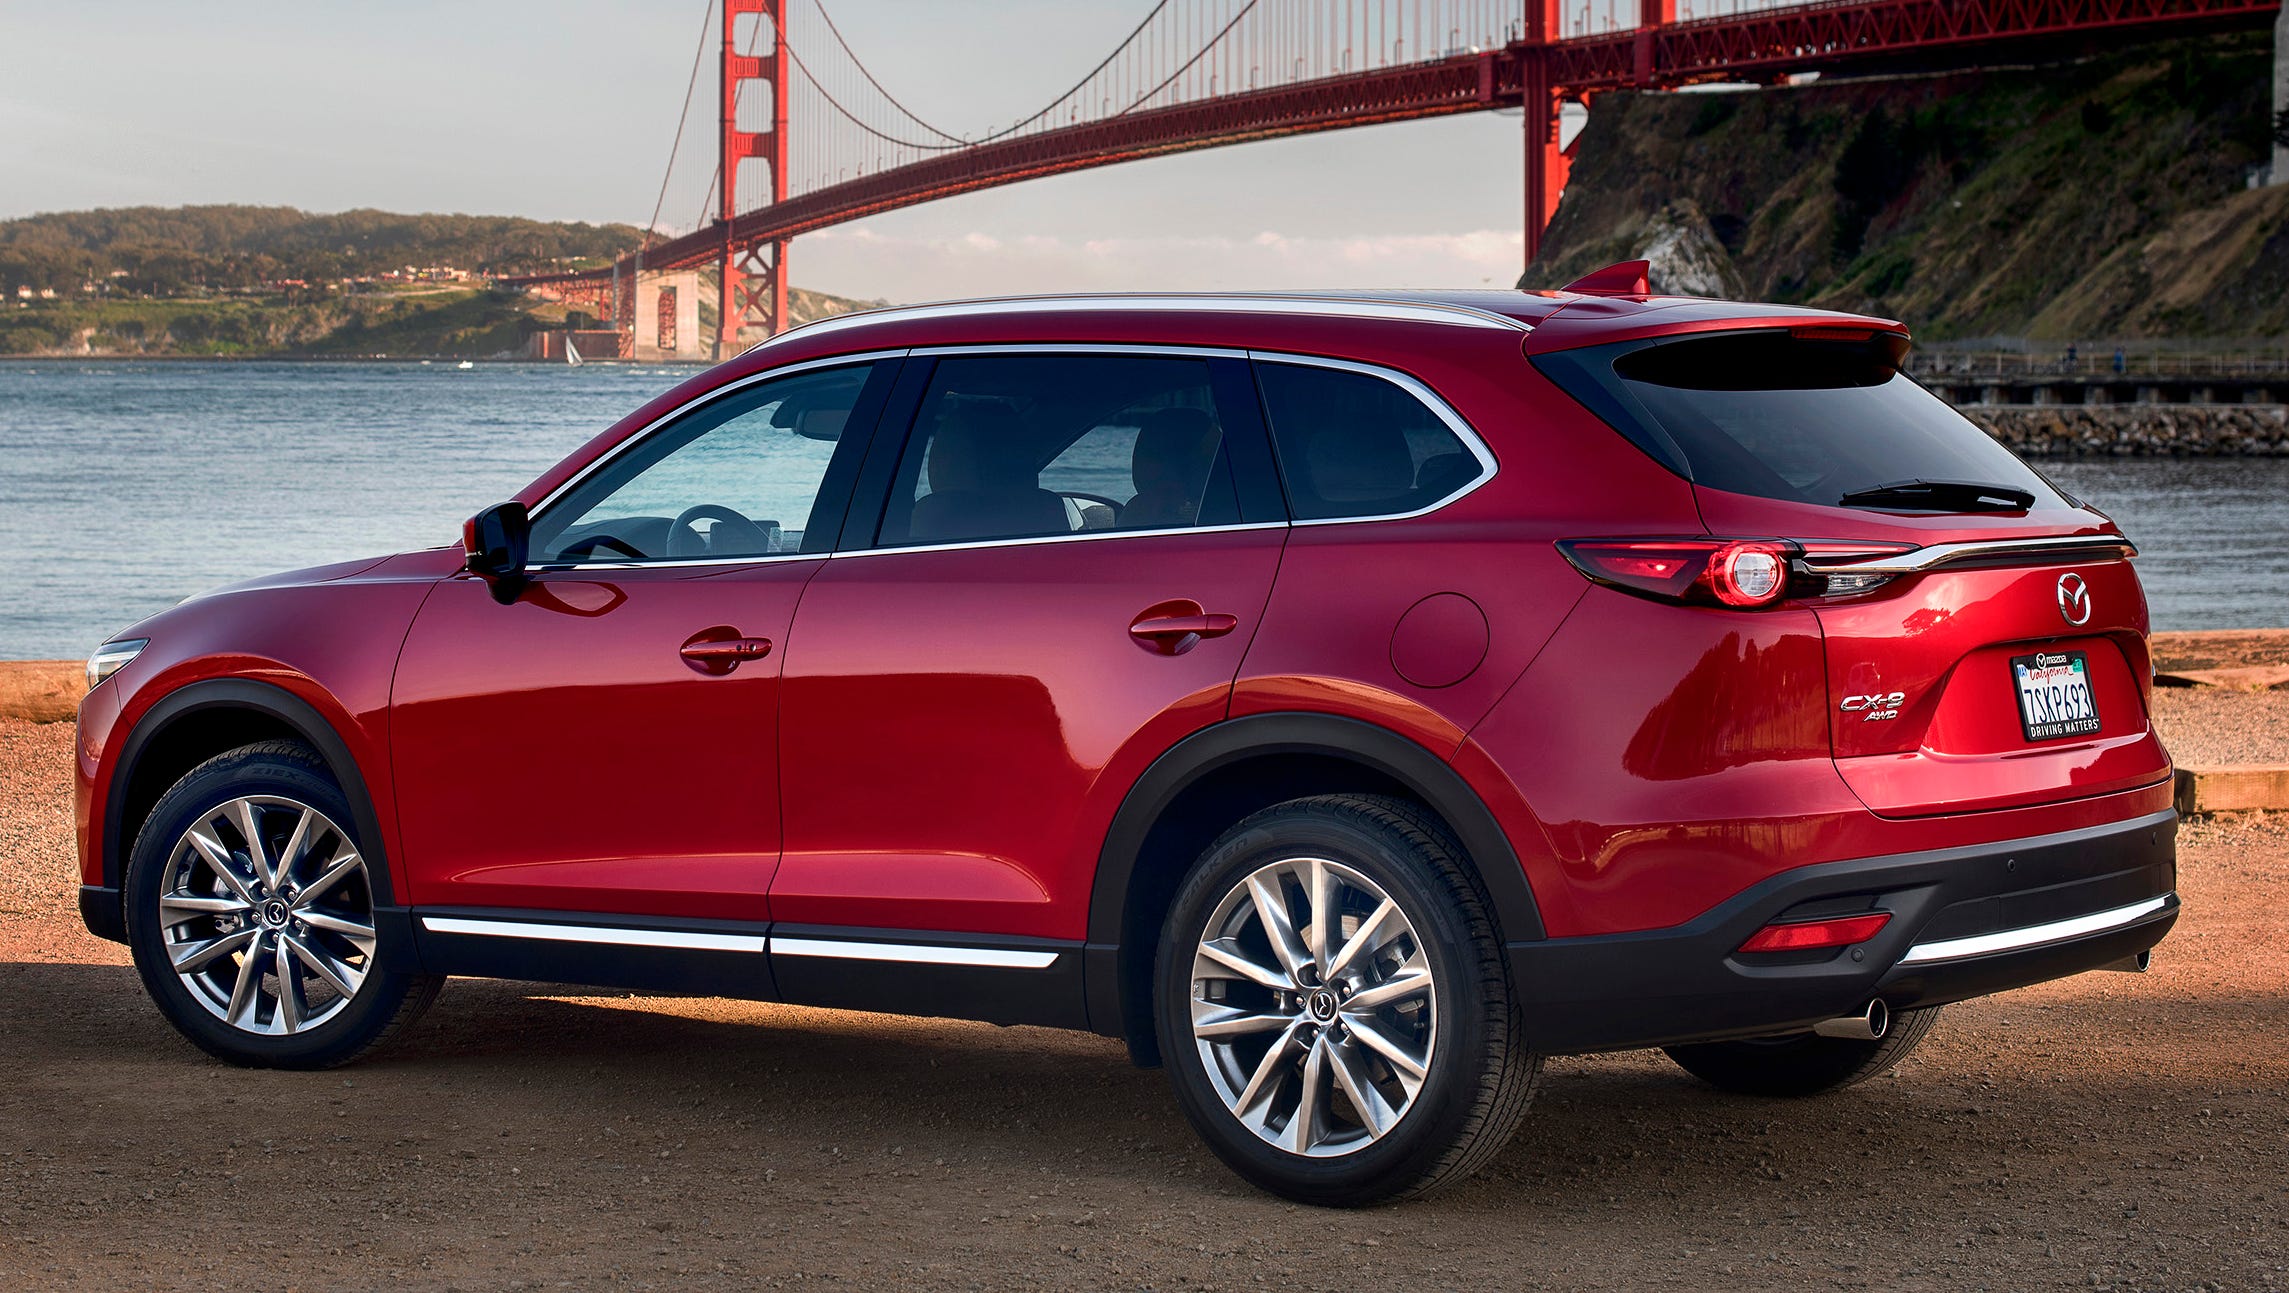 Review: Mazda goes long with new CX-9 SUV